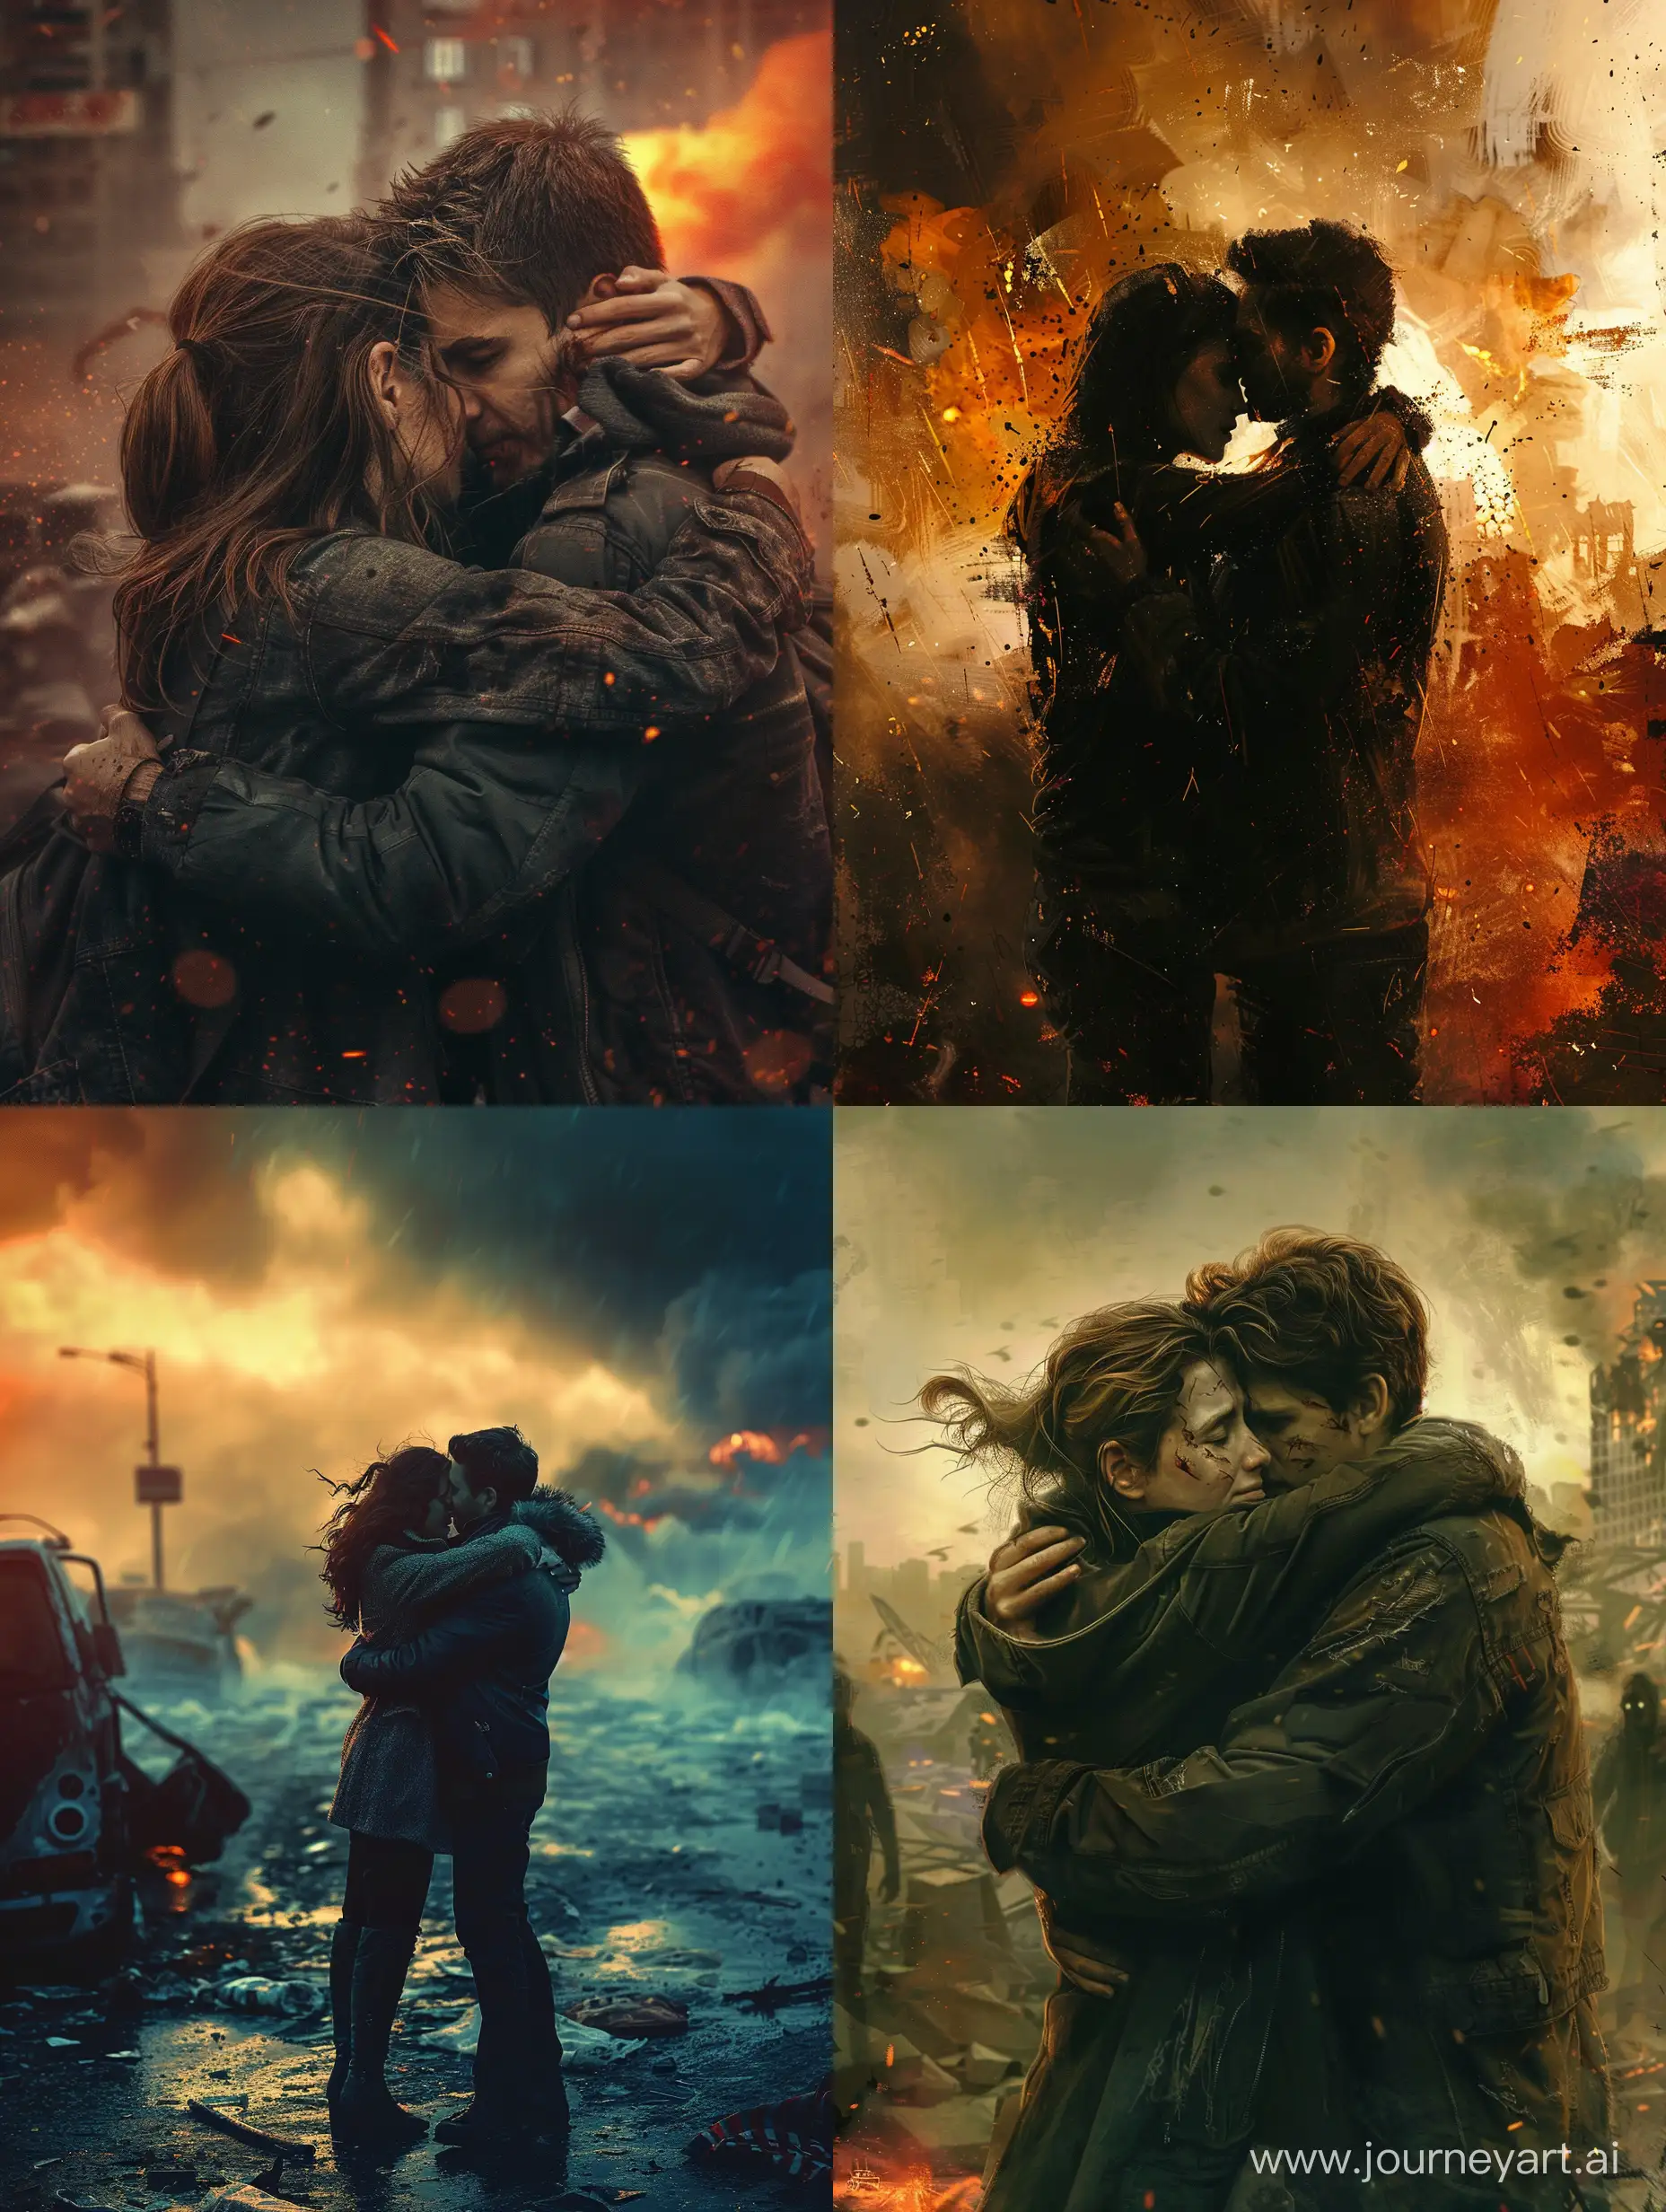 Apocalyptic-Love-Embracing-Amidst-Tragedy-and-Drama